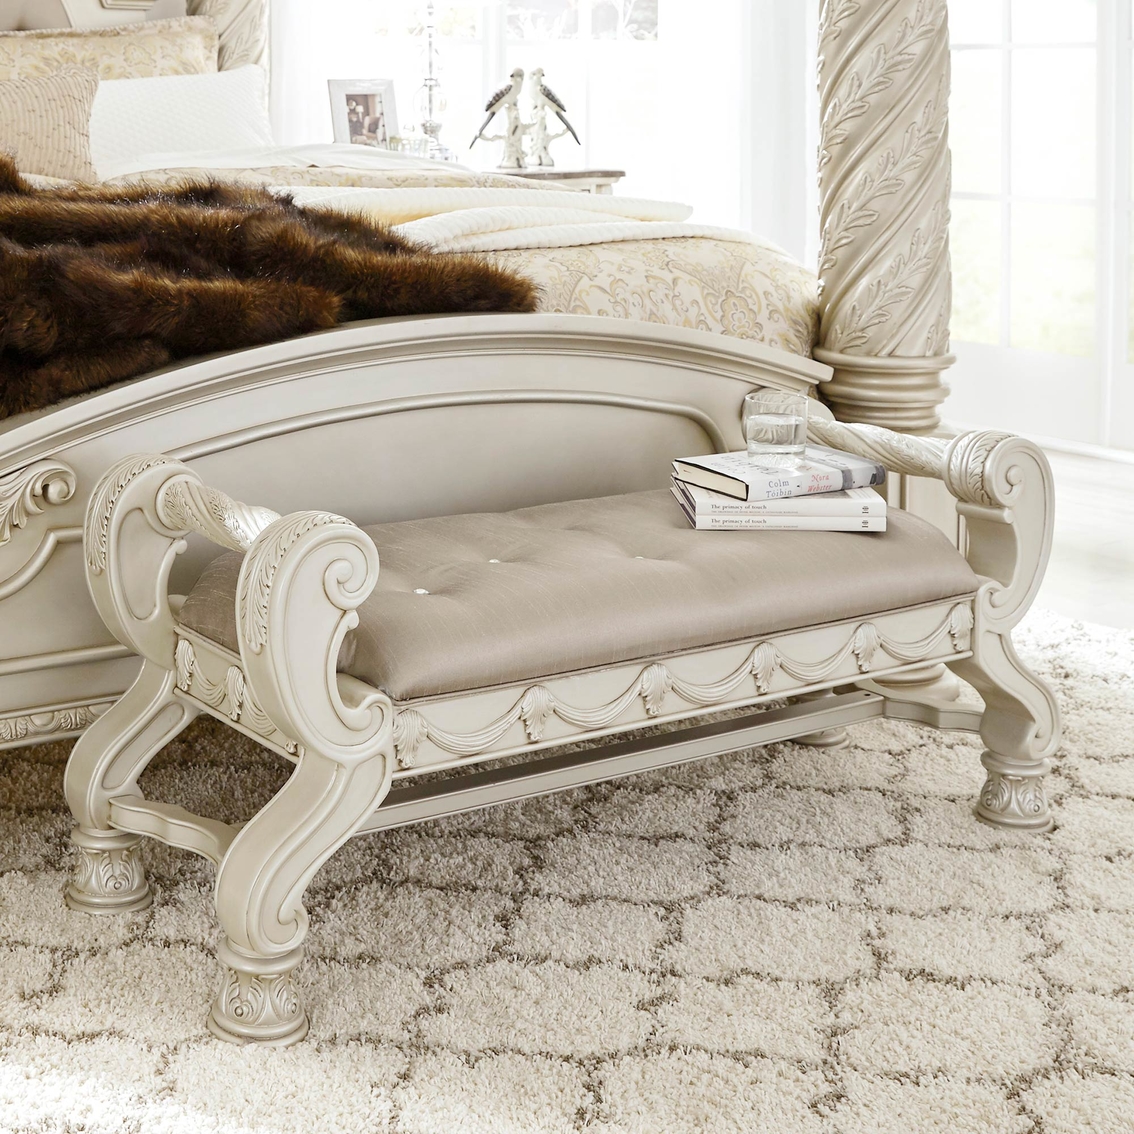 Signature Design by Ashley Cassimore Upholstered Bedroom Bench - Image 2 of 3